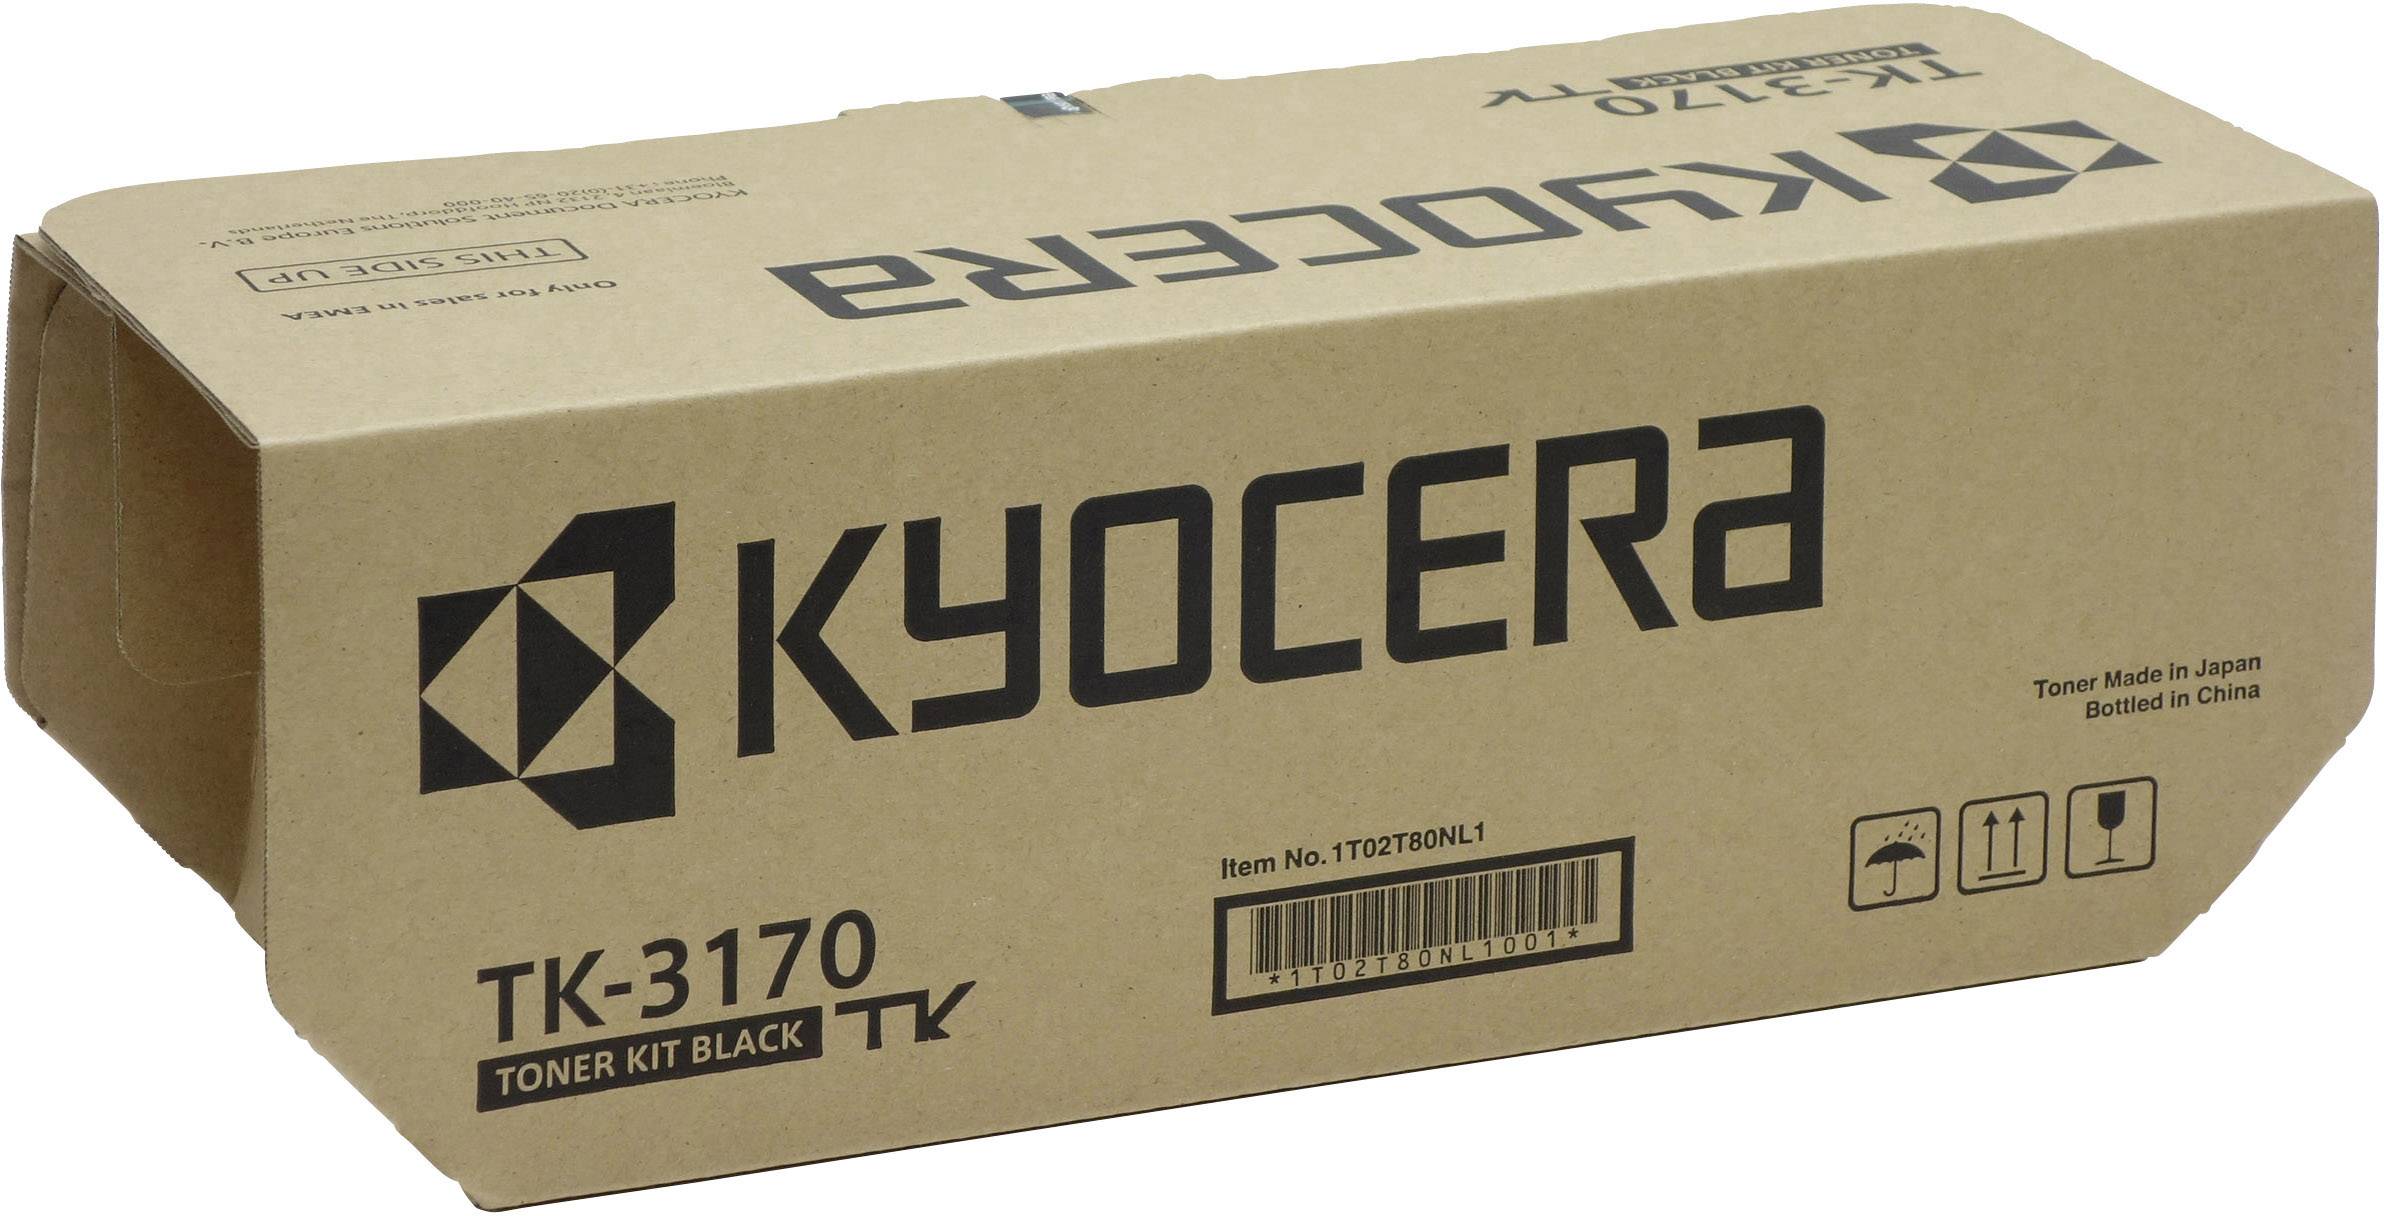 Kyocera TK-3170 Toner Kit for   Ecosys P3050dn and Ecosys P3150dn